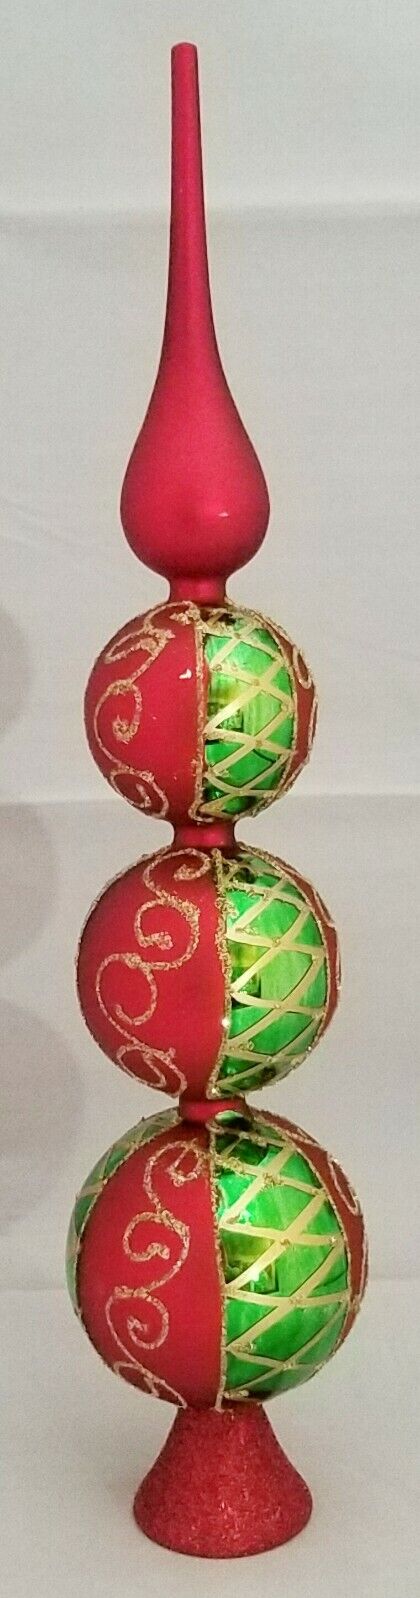 Finial Glass Large Tree Topper Red Green Christmas Decor Filigree 16